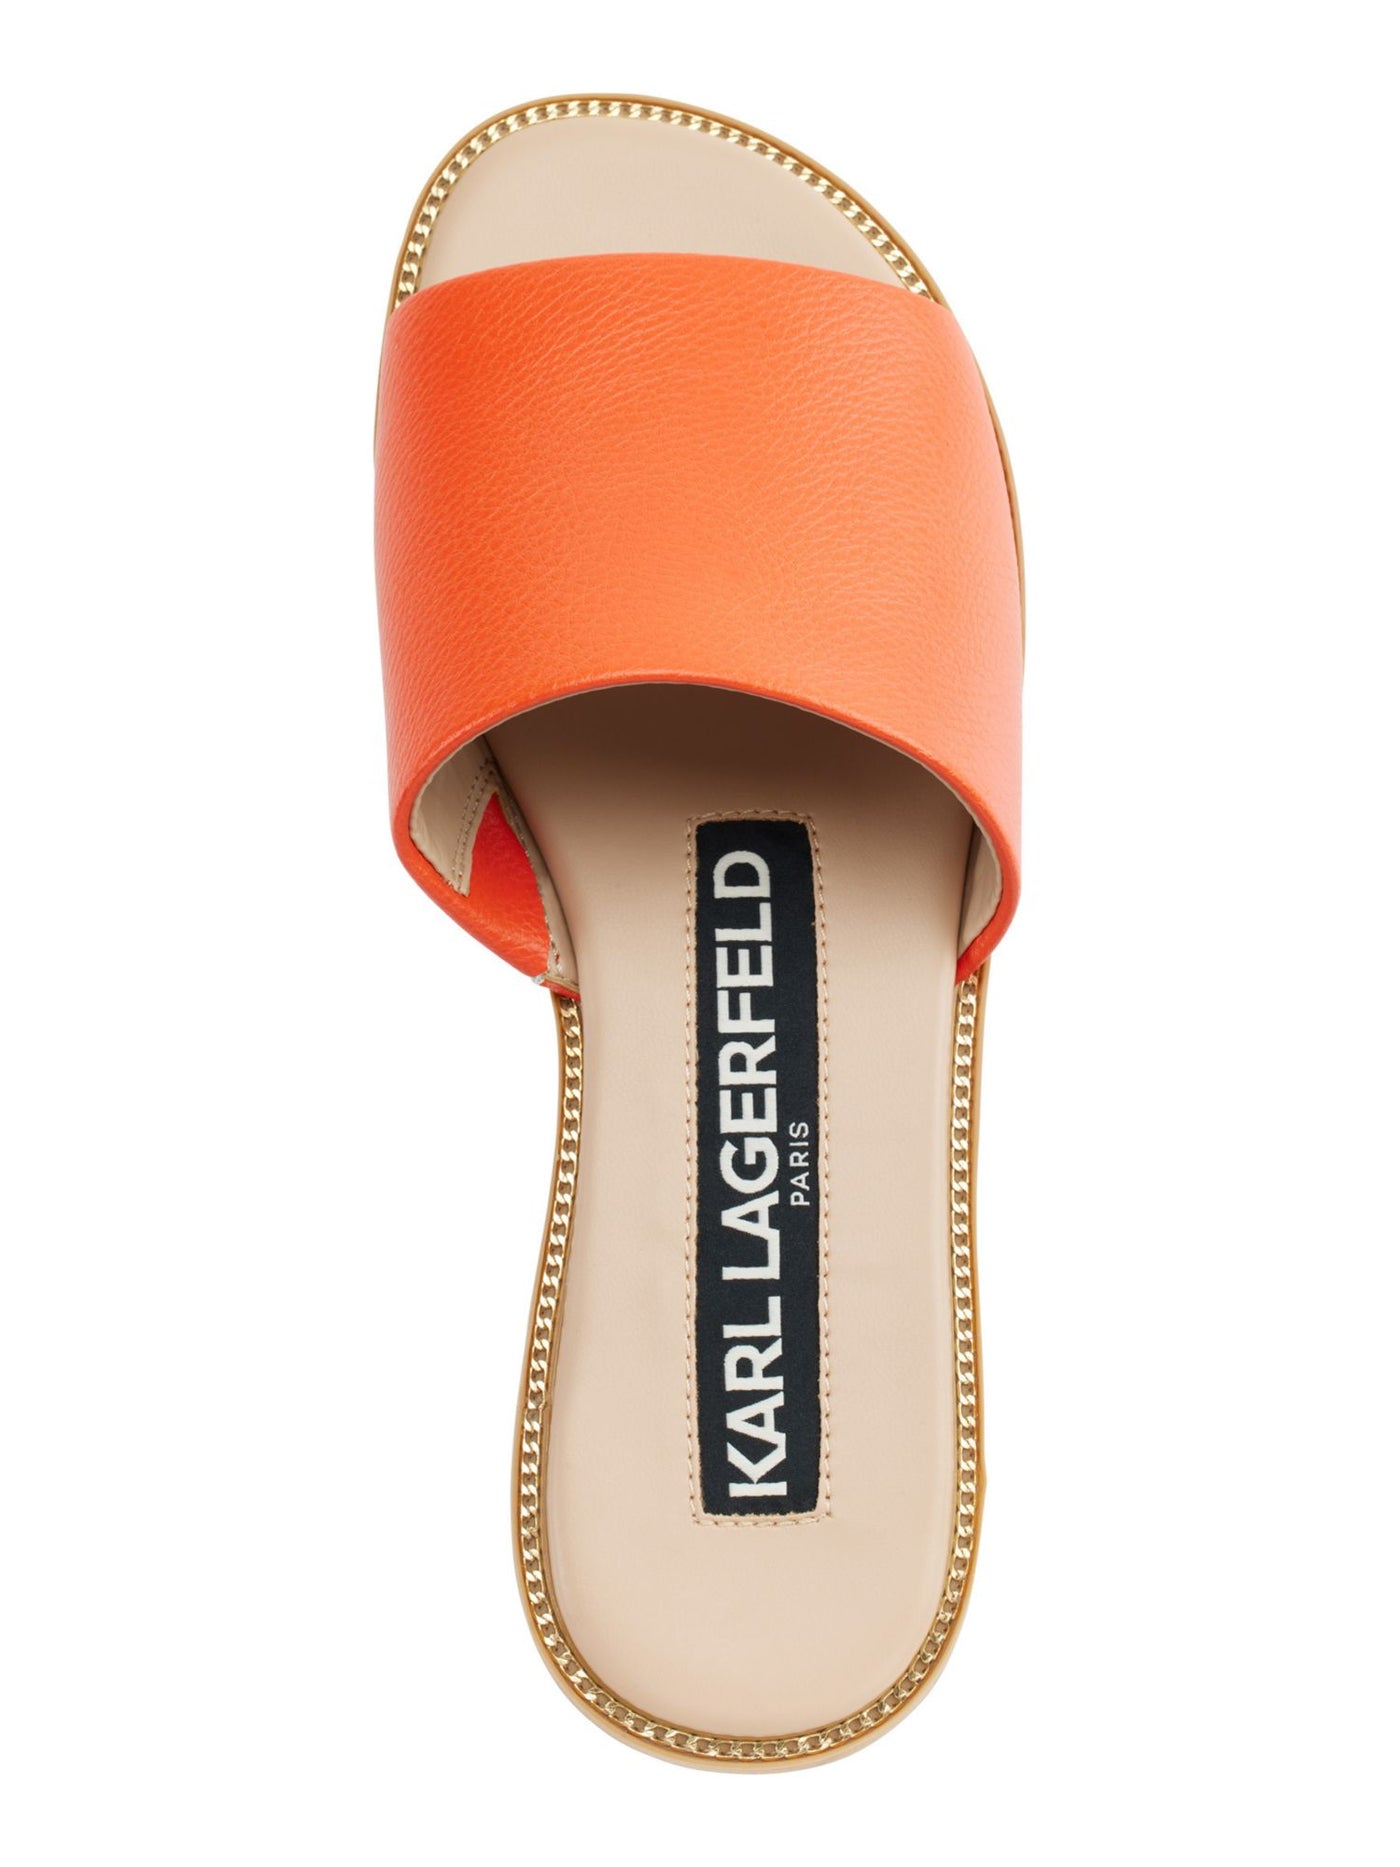 KARL LAGERFELD Womens Orange Chain Accent Trim Padded Goring Gloria Round Toe Slip On Leather Sandals Shoes 5